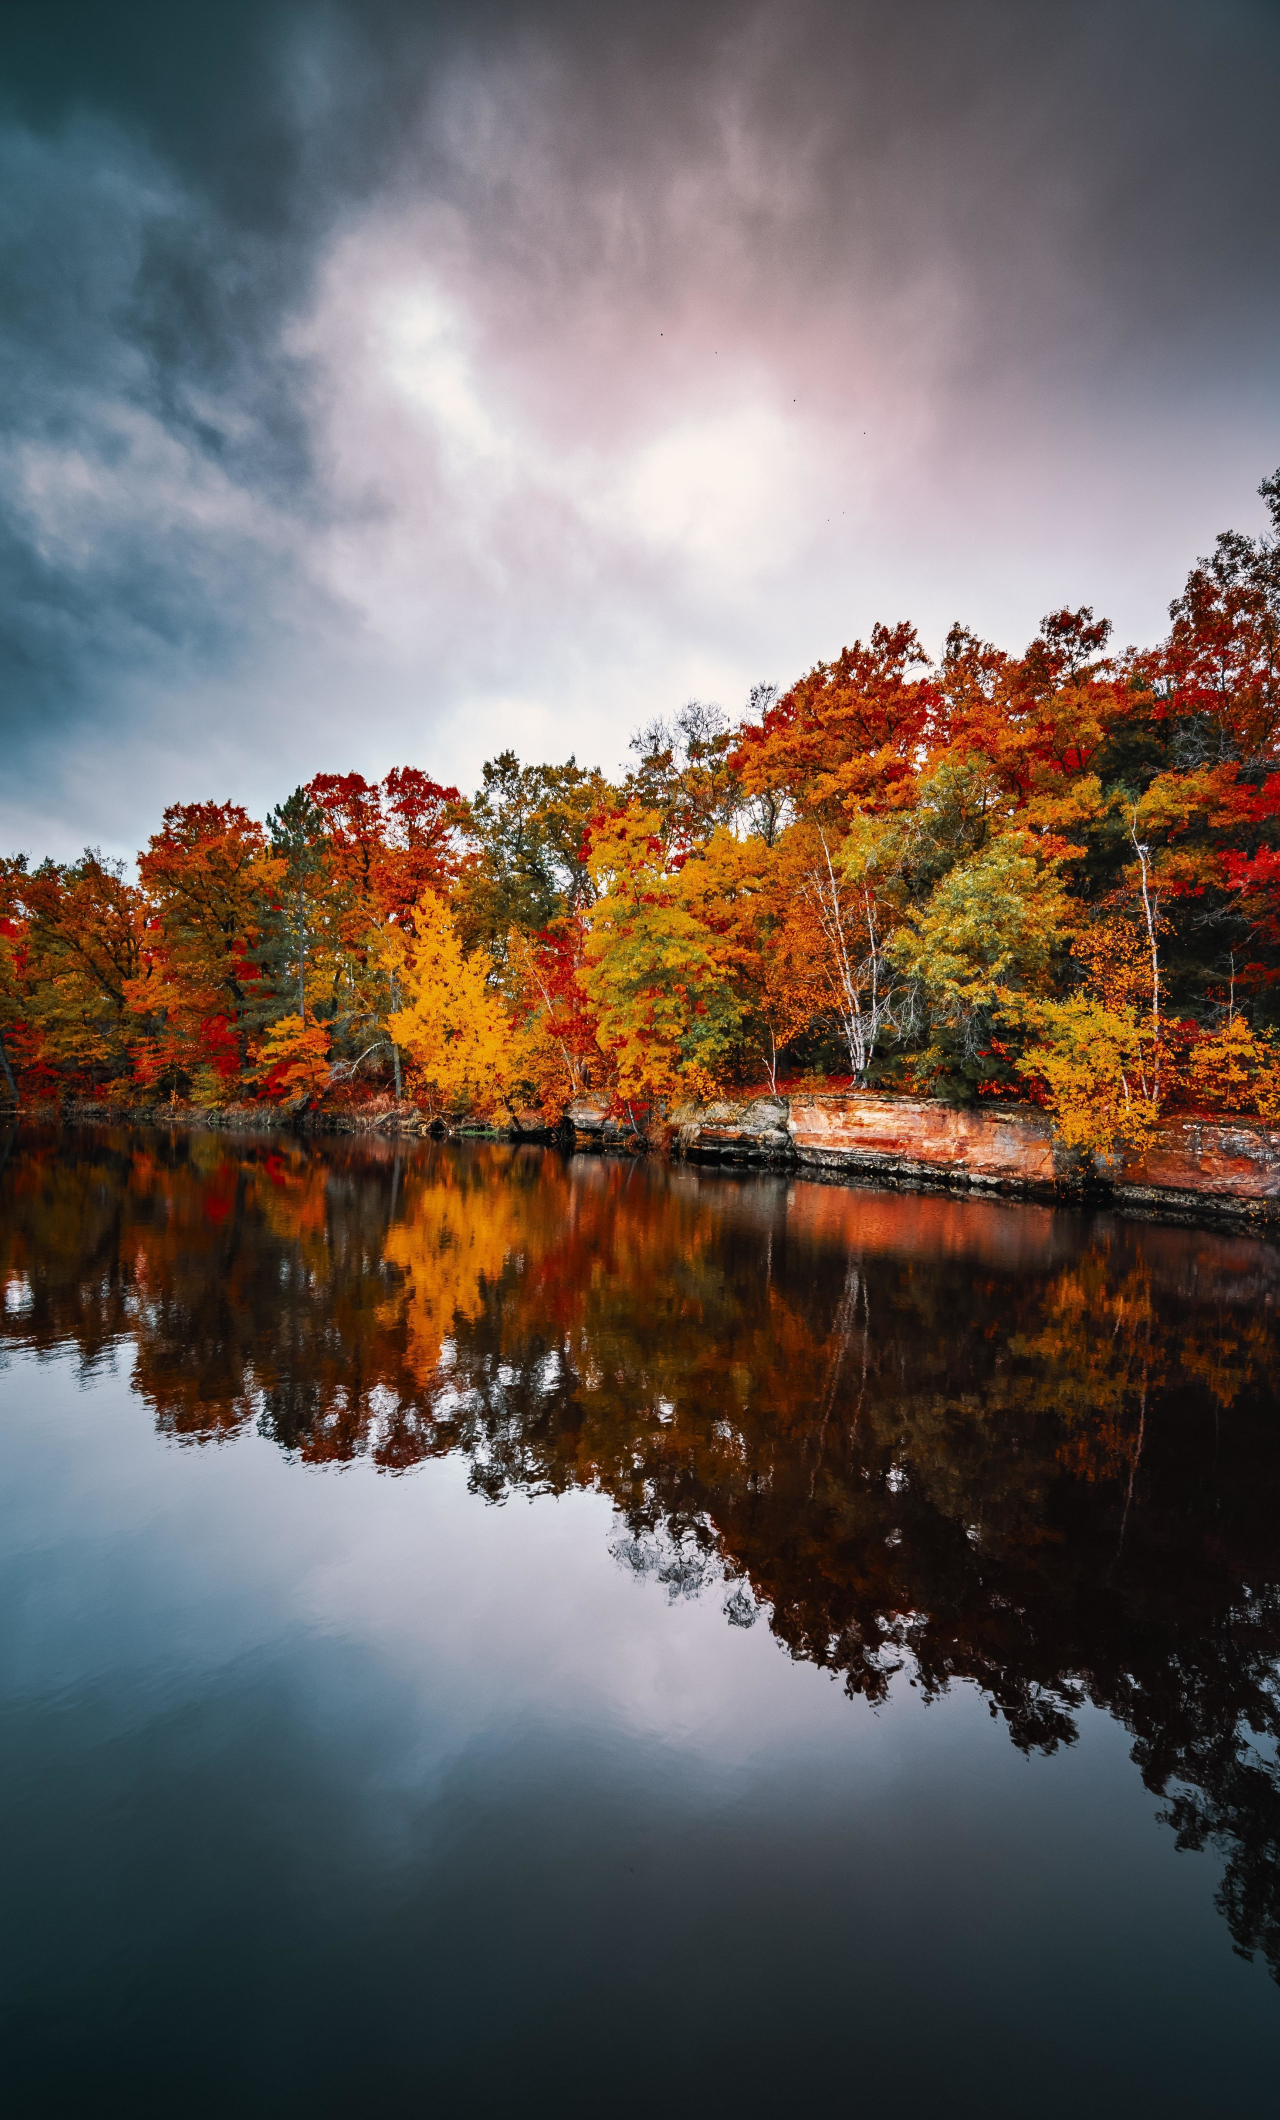 Download 1280x2120 wallpaper autumn, lake, nature, reflections, iphone 6 plus, 1280x2120 HD image, background, 25427